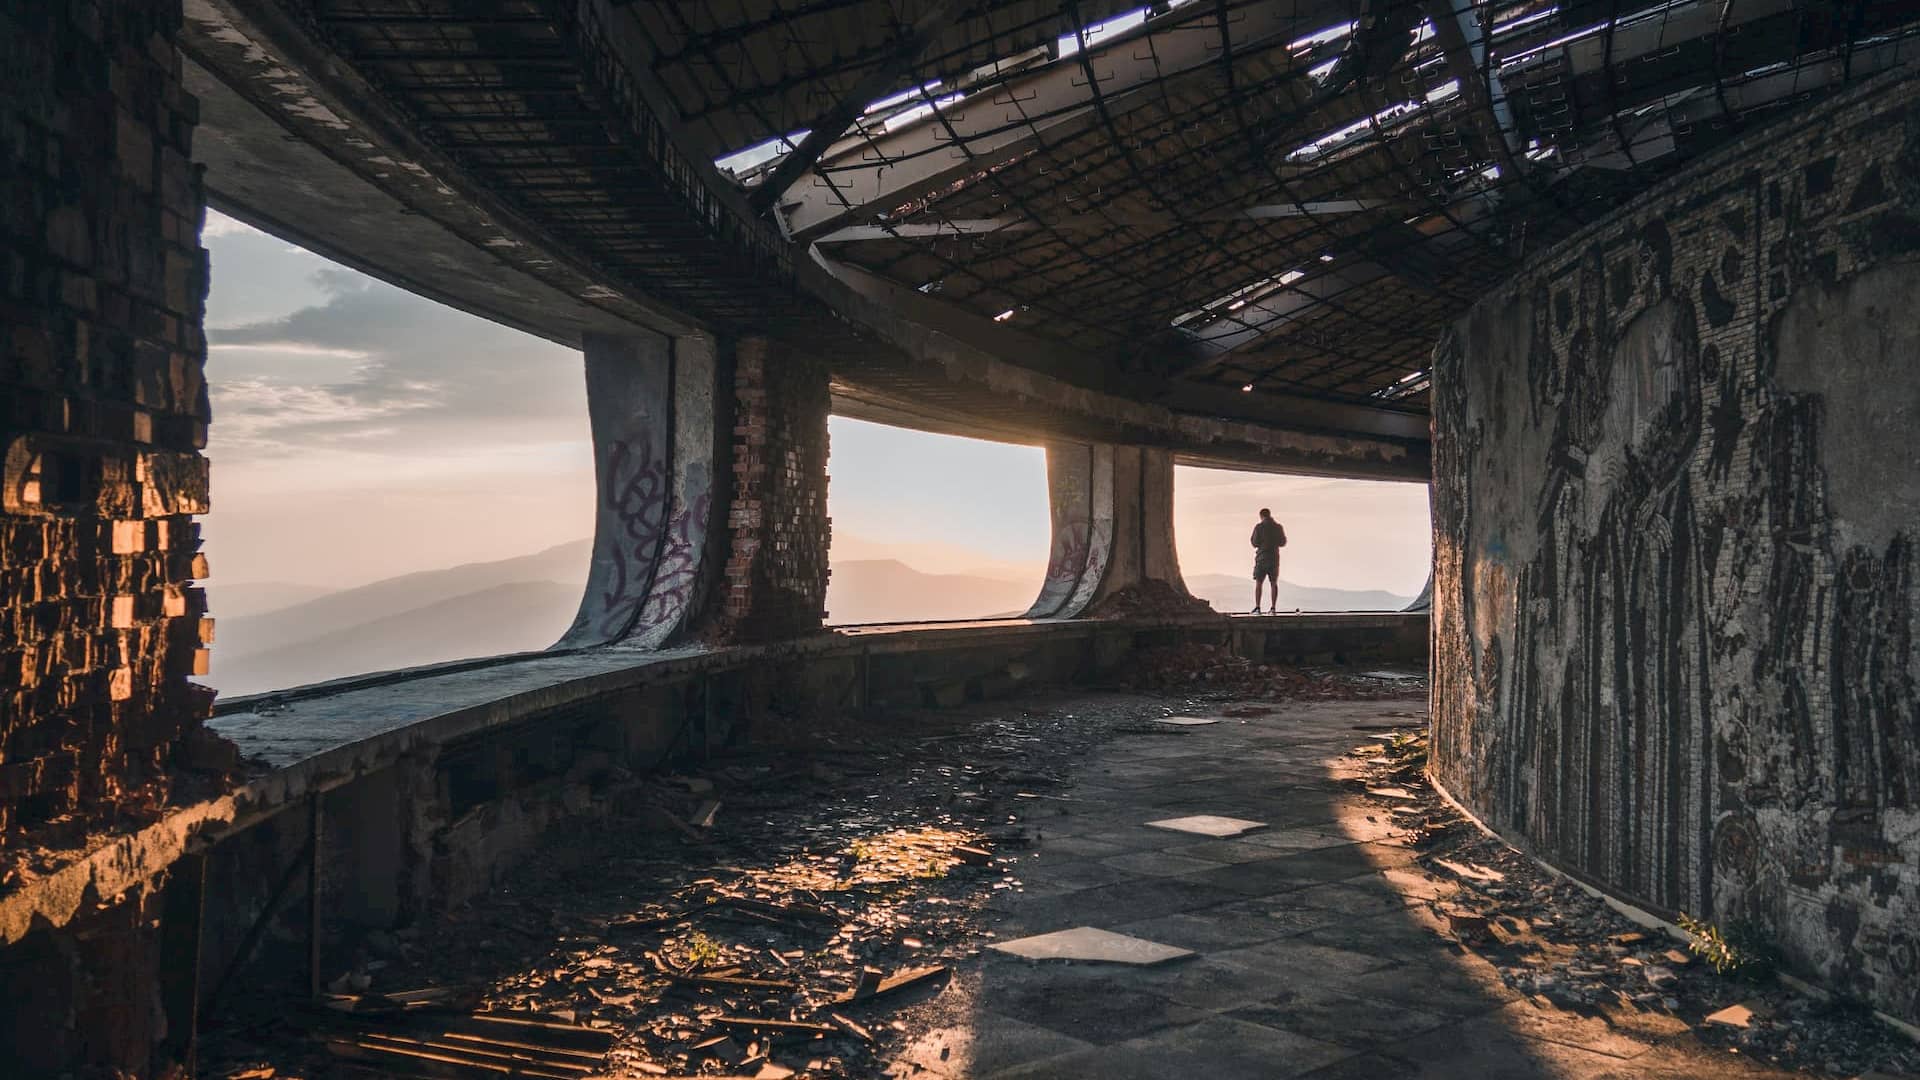 View from within the ruins of the Monument House of he Bulgarian Communist Party, built on Buzludzha Peak in central Bulgaria. Photo by Natalya Letunova on Unsplash